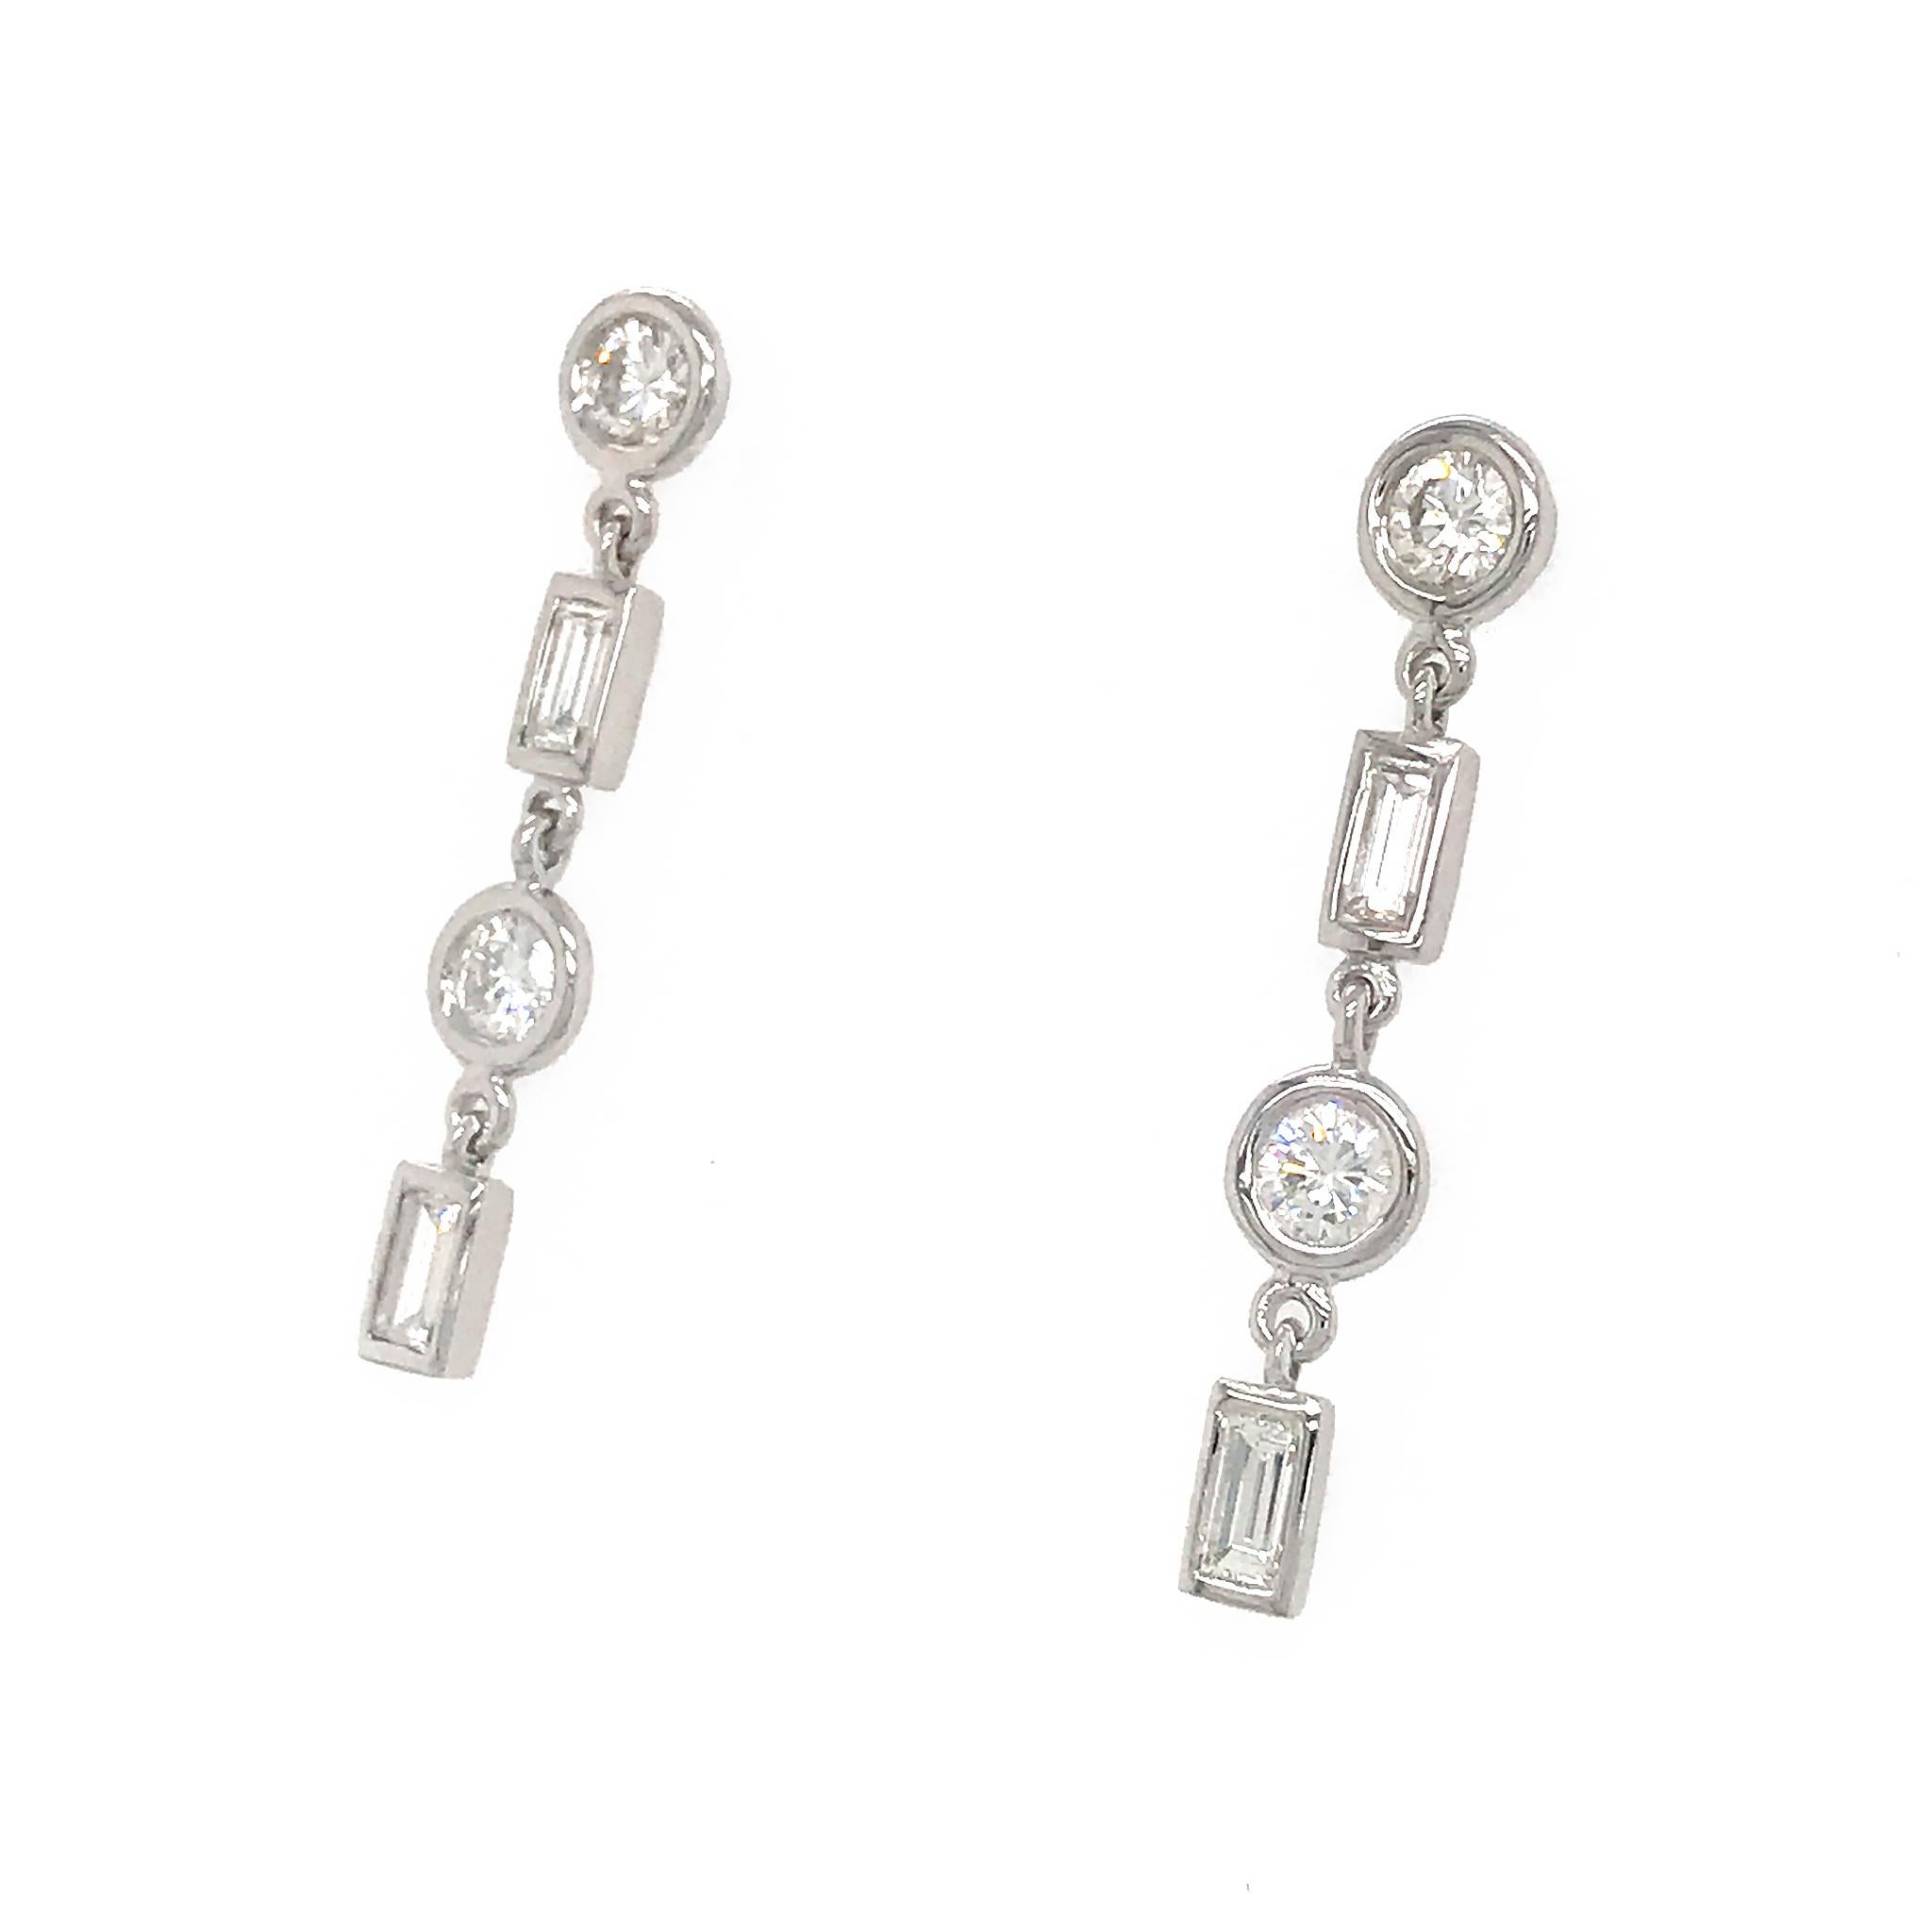 METAL TYPE: 14k White Gold
STONE WEIGHT: Rounds = 1.35ct twd
                             Baguettes = 0.69ct twd
TOTAL WEIGHT: 2.5 grams
EARRINGS LENGTH: 1.15 inches